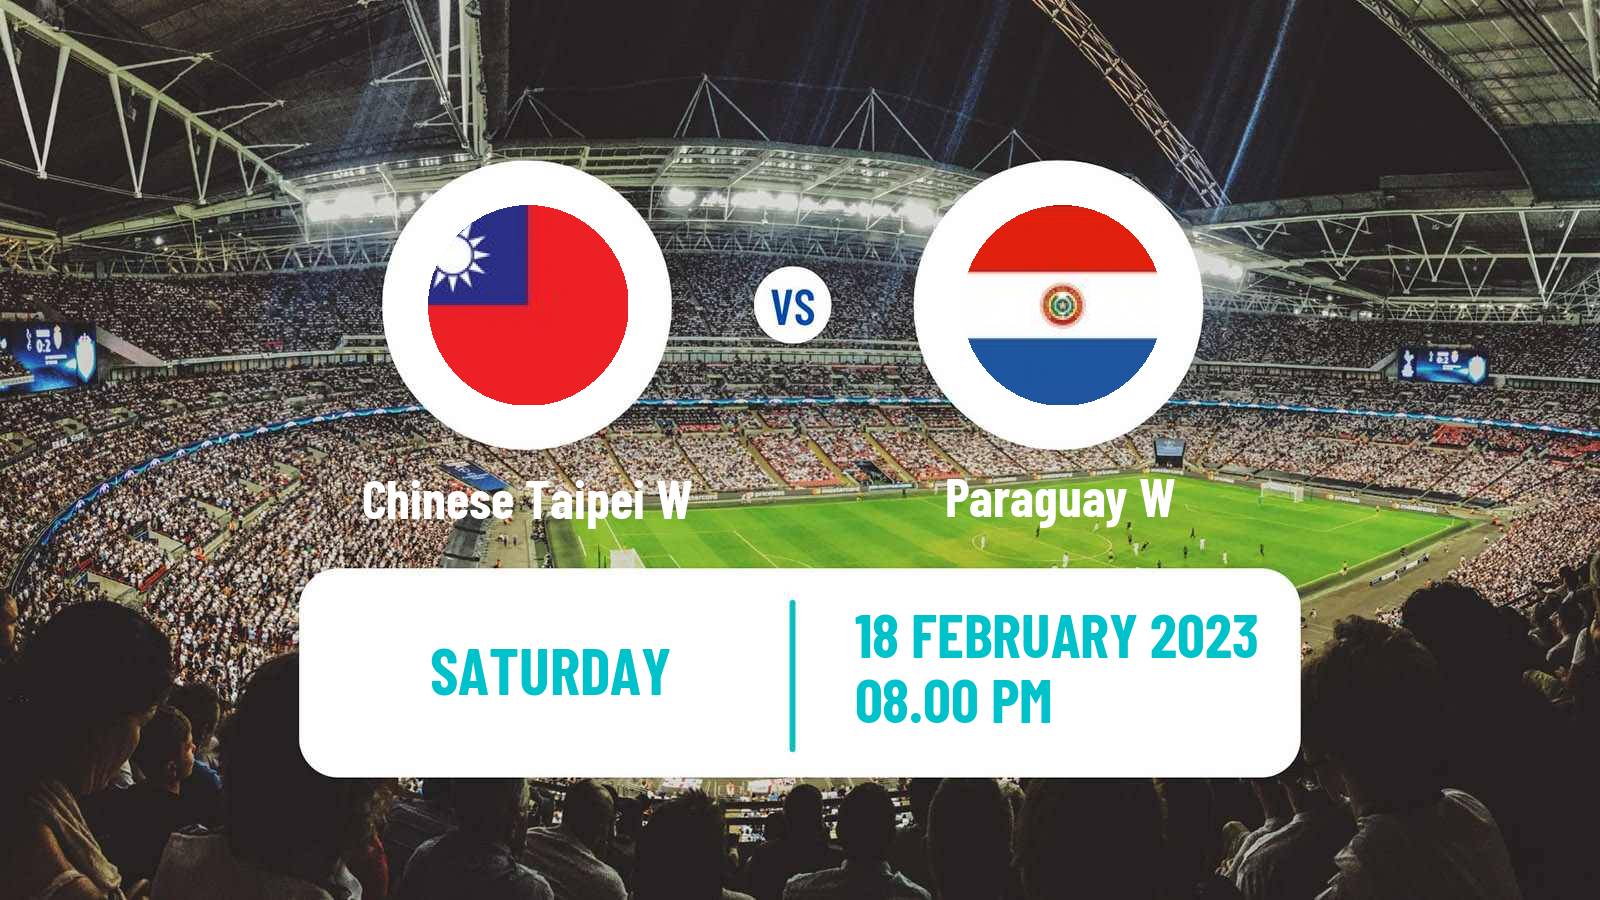 Soccer FIFA World Cup Women Chinese Taipei W - Paraguay W